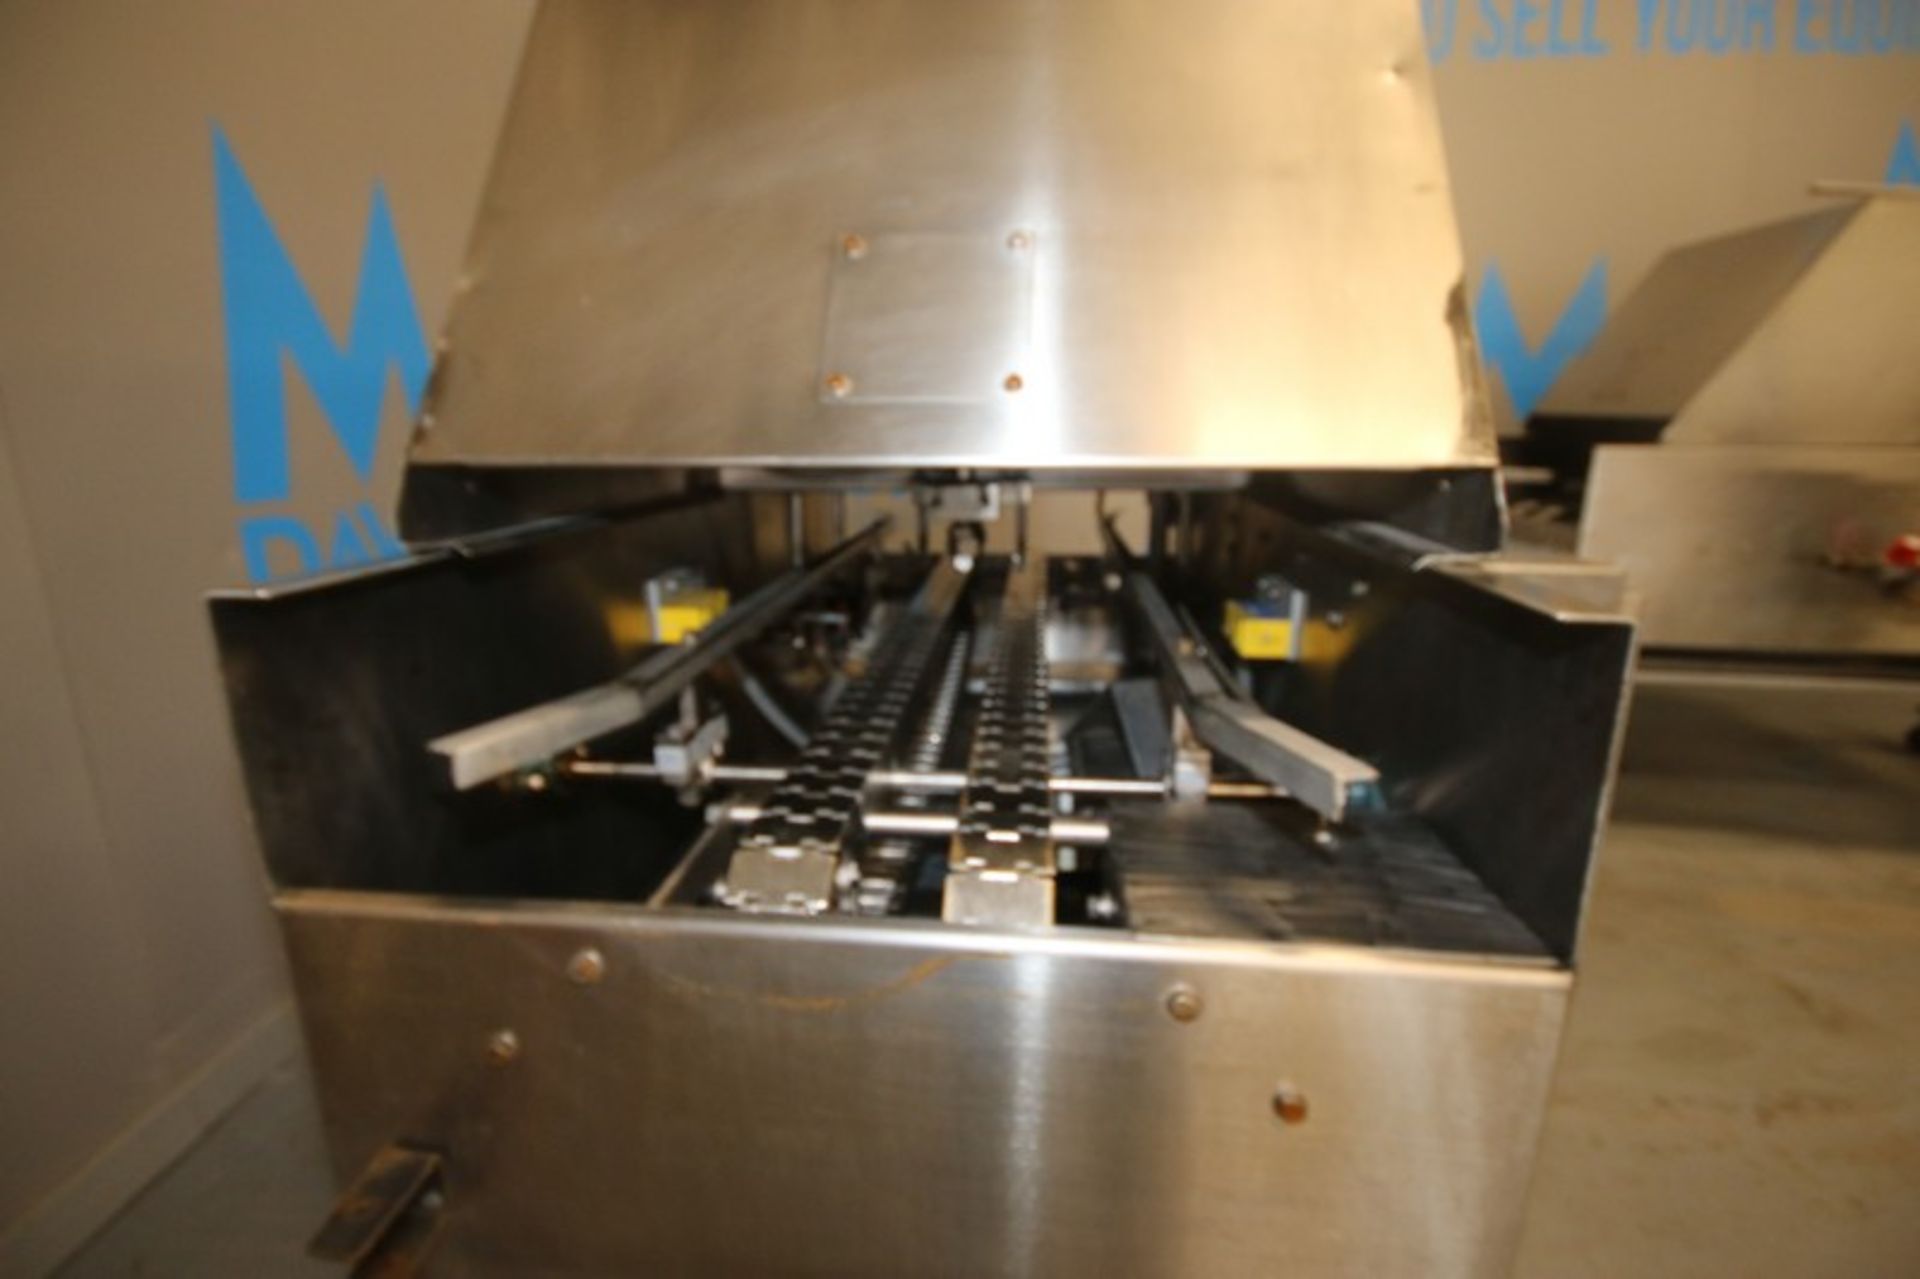 Mallet S/S Bread Pan Oiler, M/N 01A, S/N 242-456, 460 Volts, 3 Phase, Mounted on Portable Frame ( - Image 5 of 15